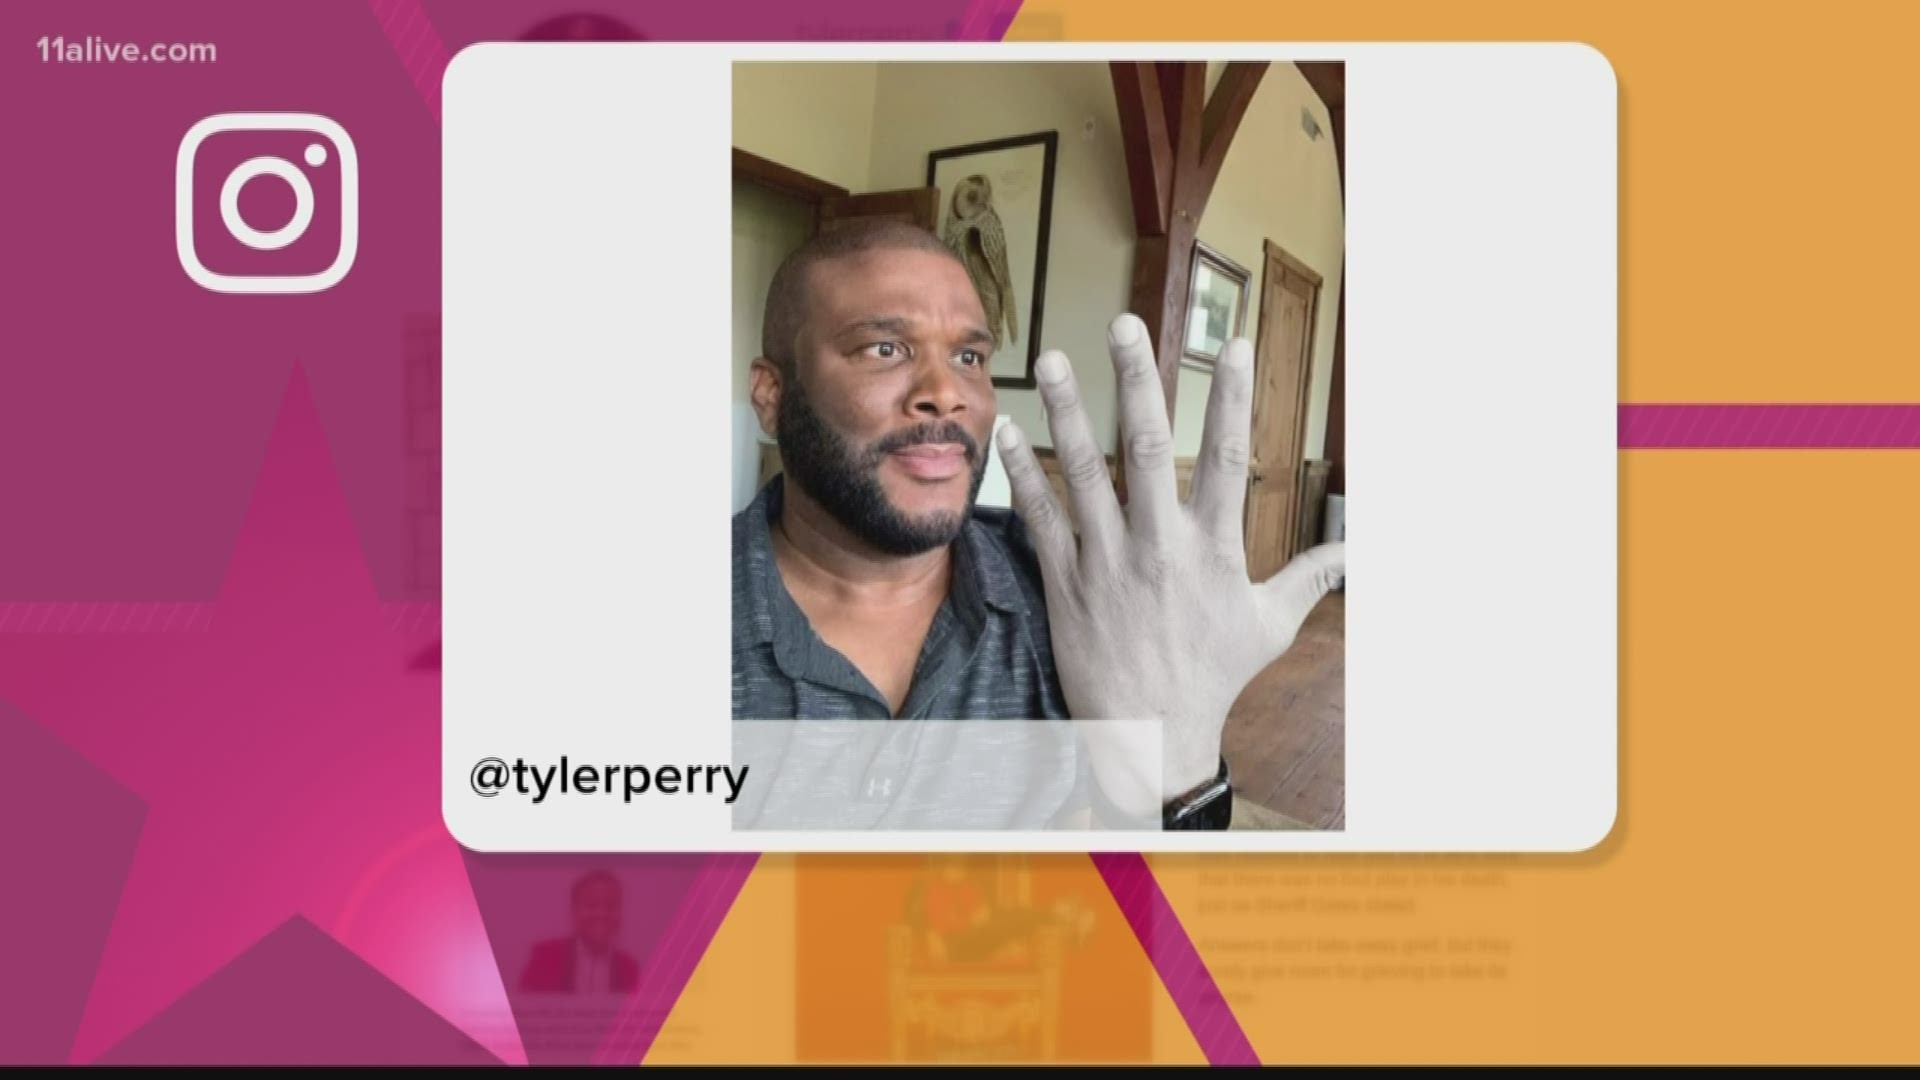 Tyler Perry has stopped production of shows but is keeping the humor going on social media.